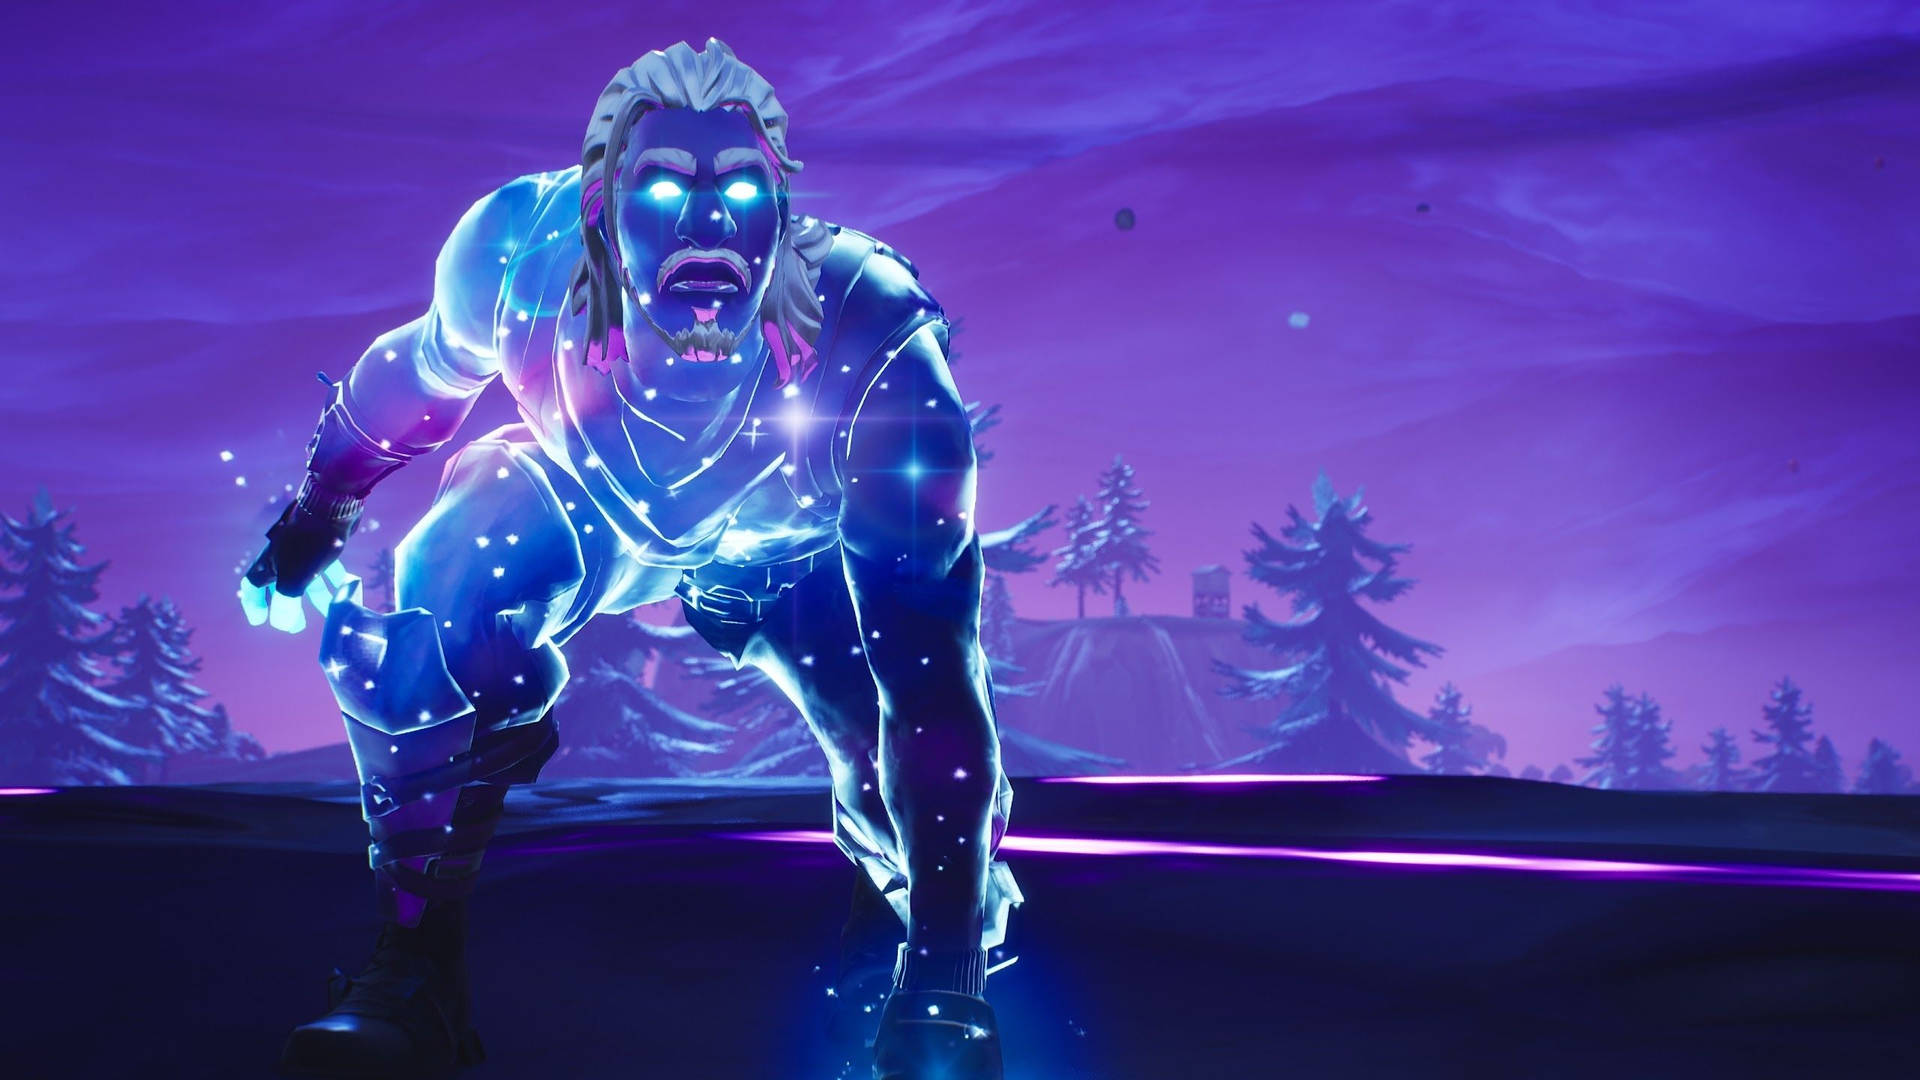 Fortnite Galaxy Skin In Action On A 2560x1440 Wallpaper Background